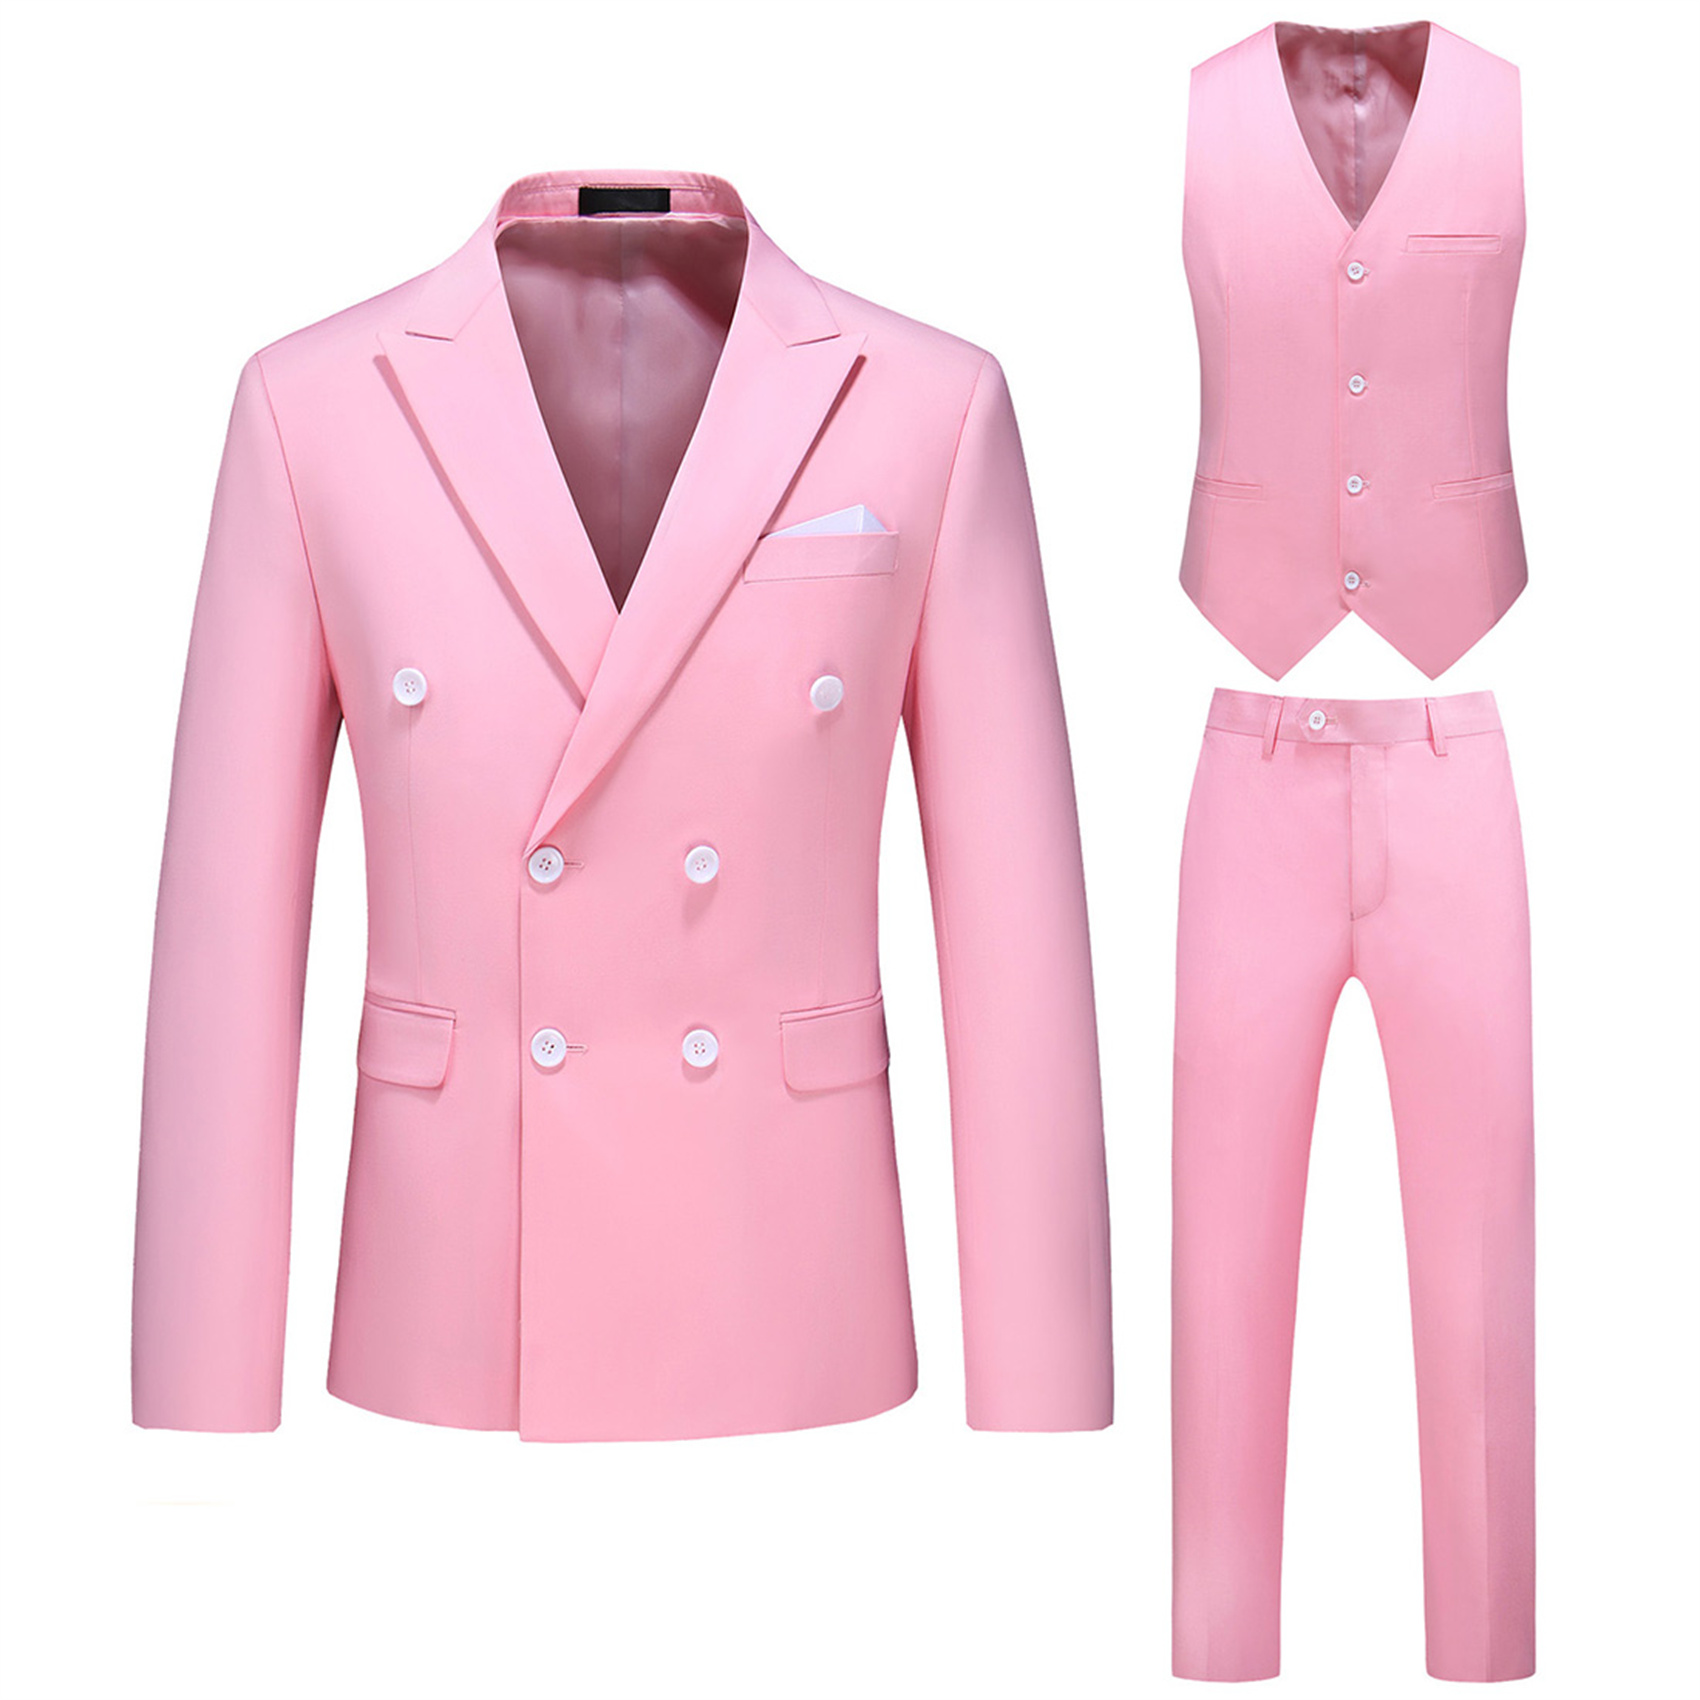 2 Piece Double Breasted Suit for Men, Slim Fit, Light Pink